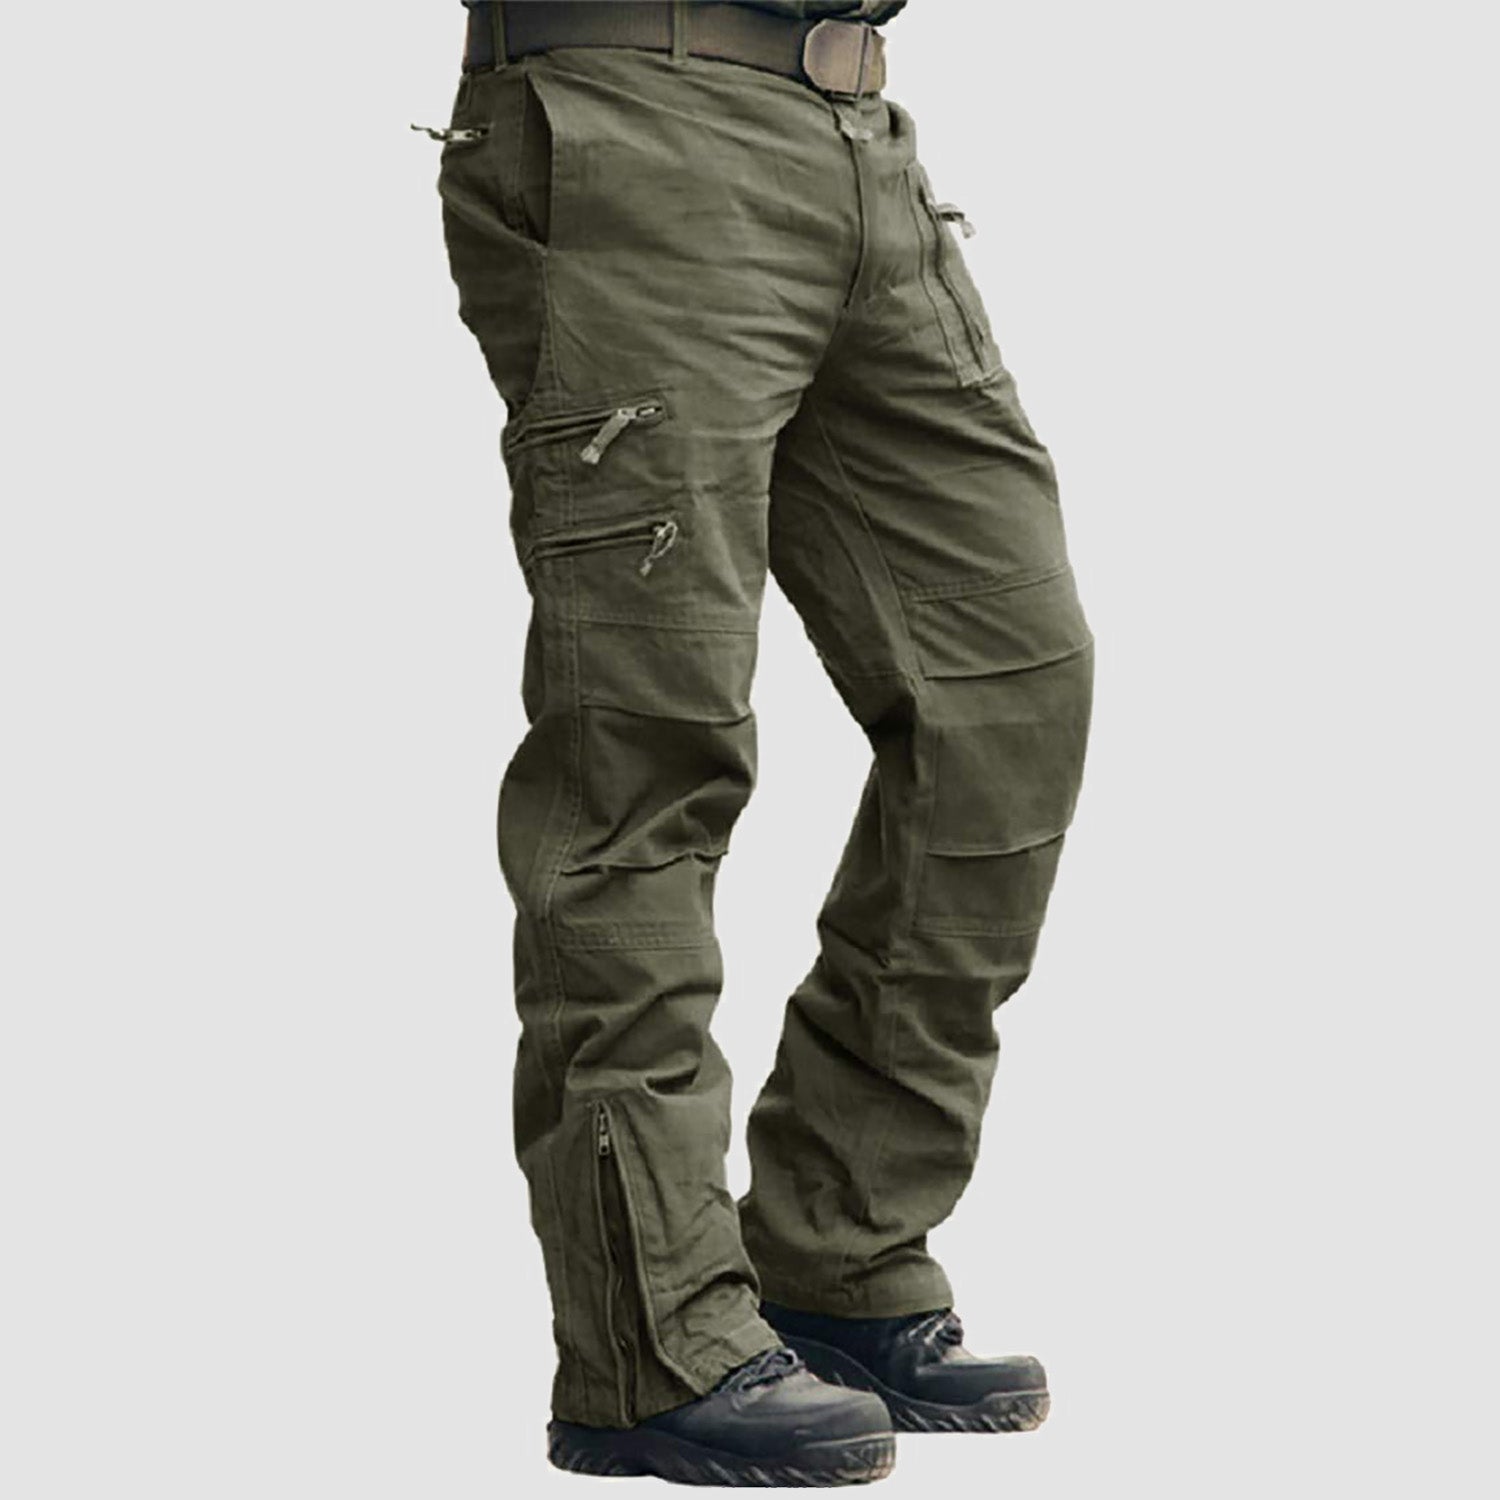 Men's Tactical Pants with 9 Pockets Ripstop Cargo Pants Lightweight Hiking